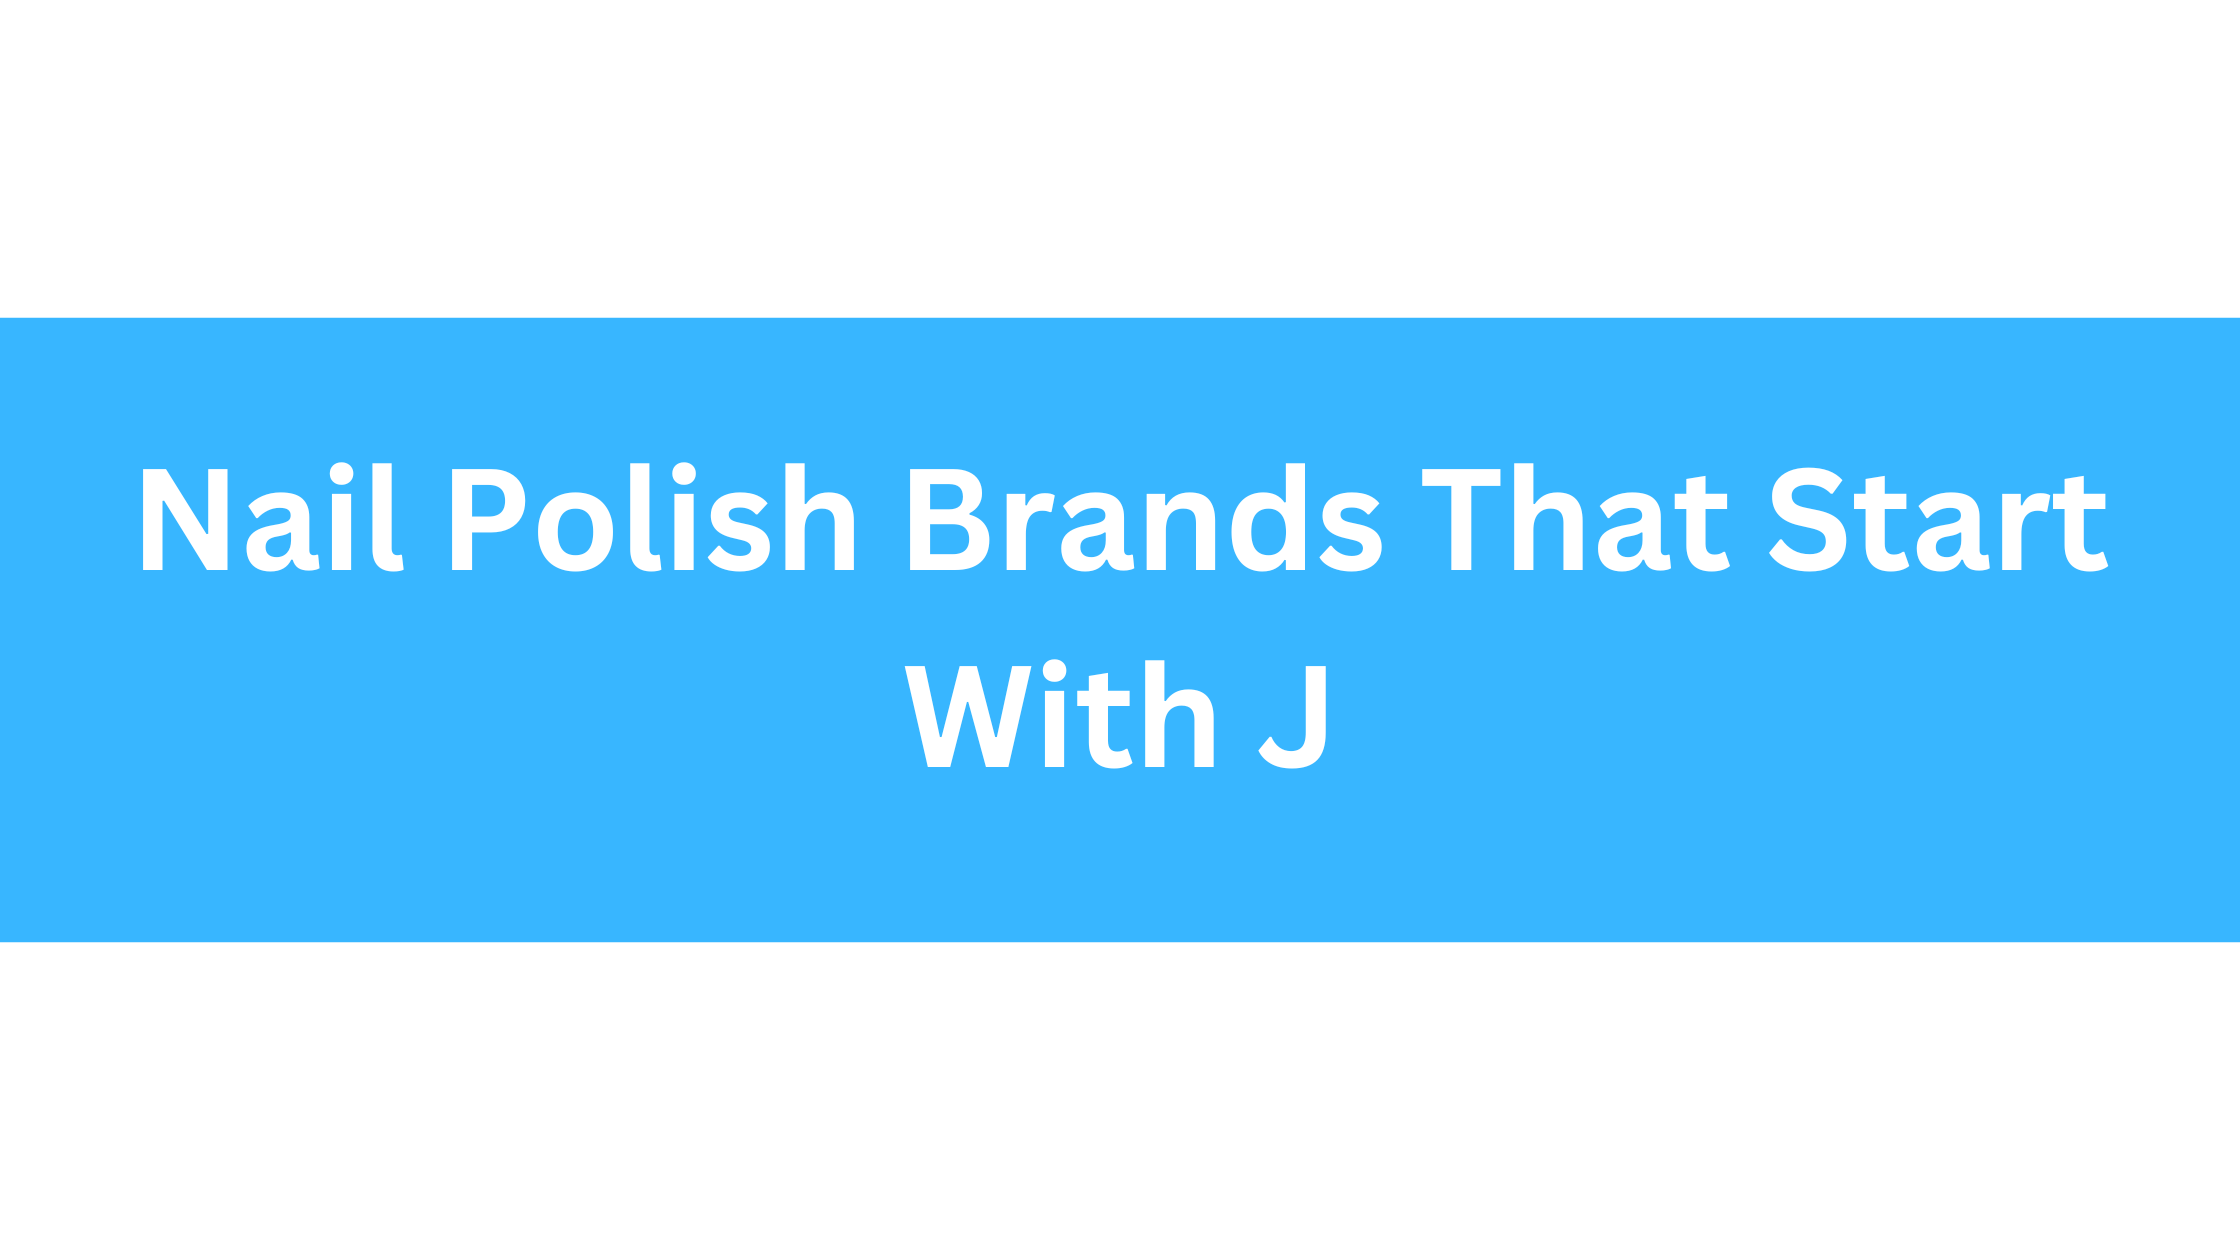 Nail Polish Brands That Start With J